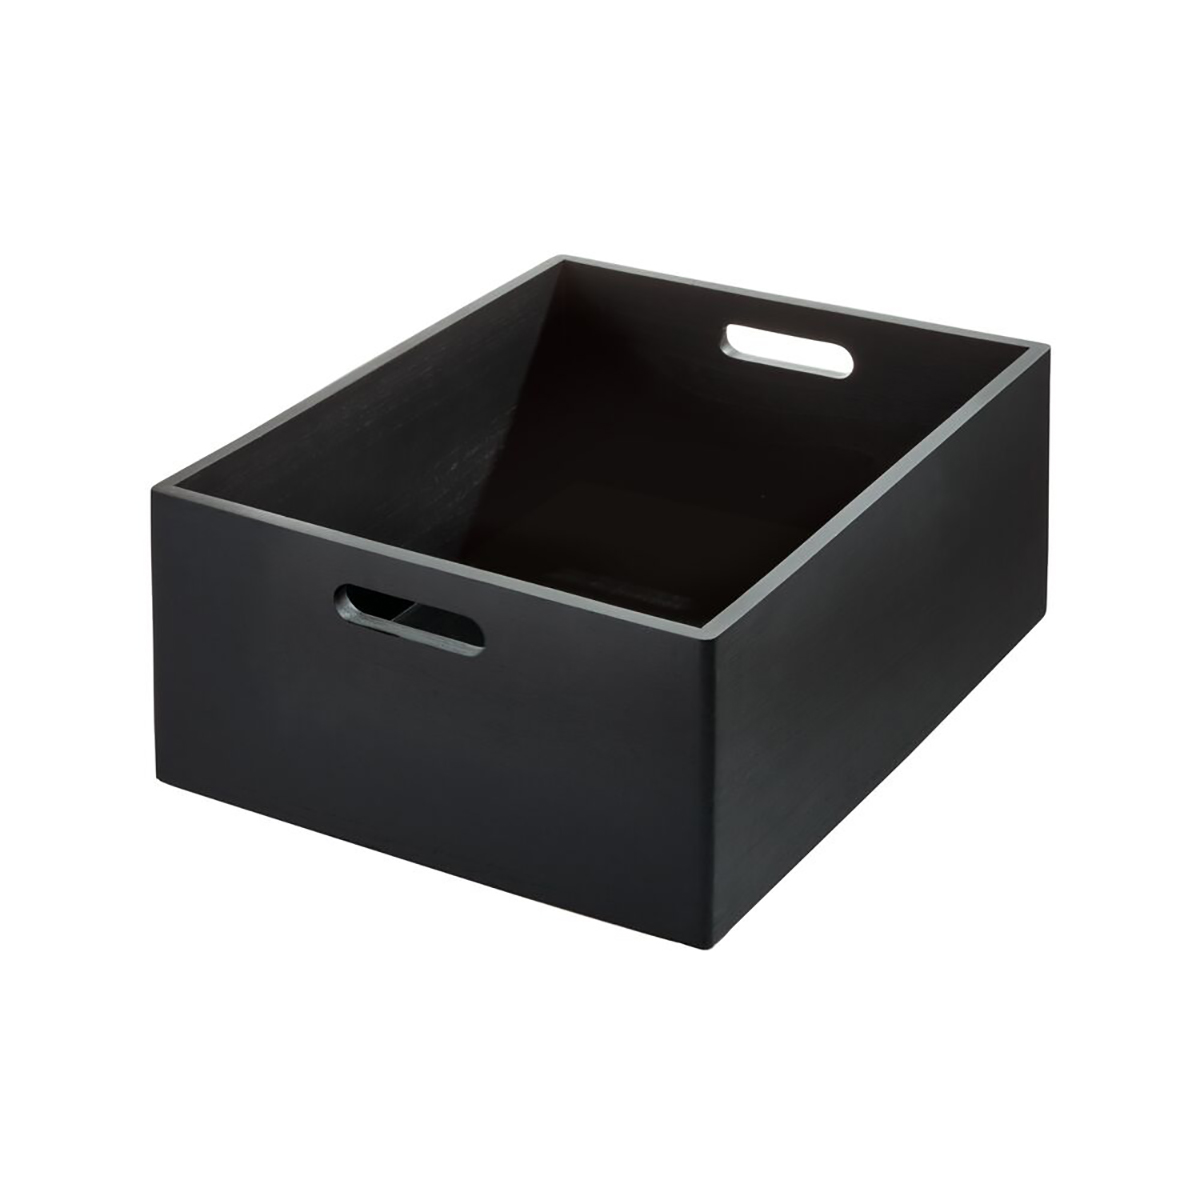 THE HOME EDIT X-Large Wooden Bin Onyx